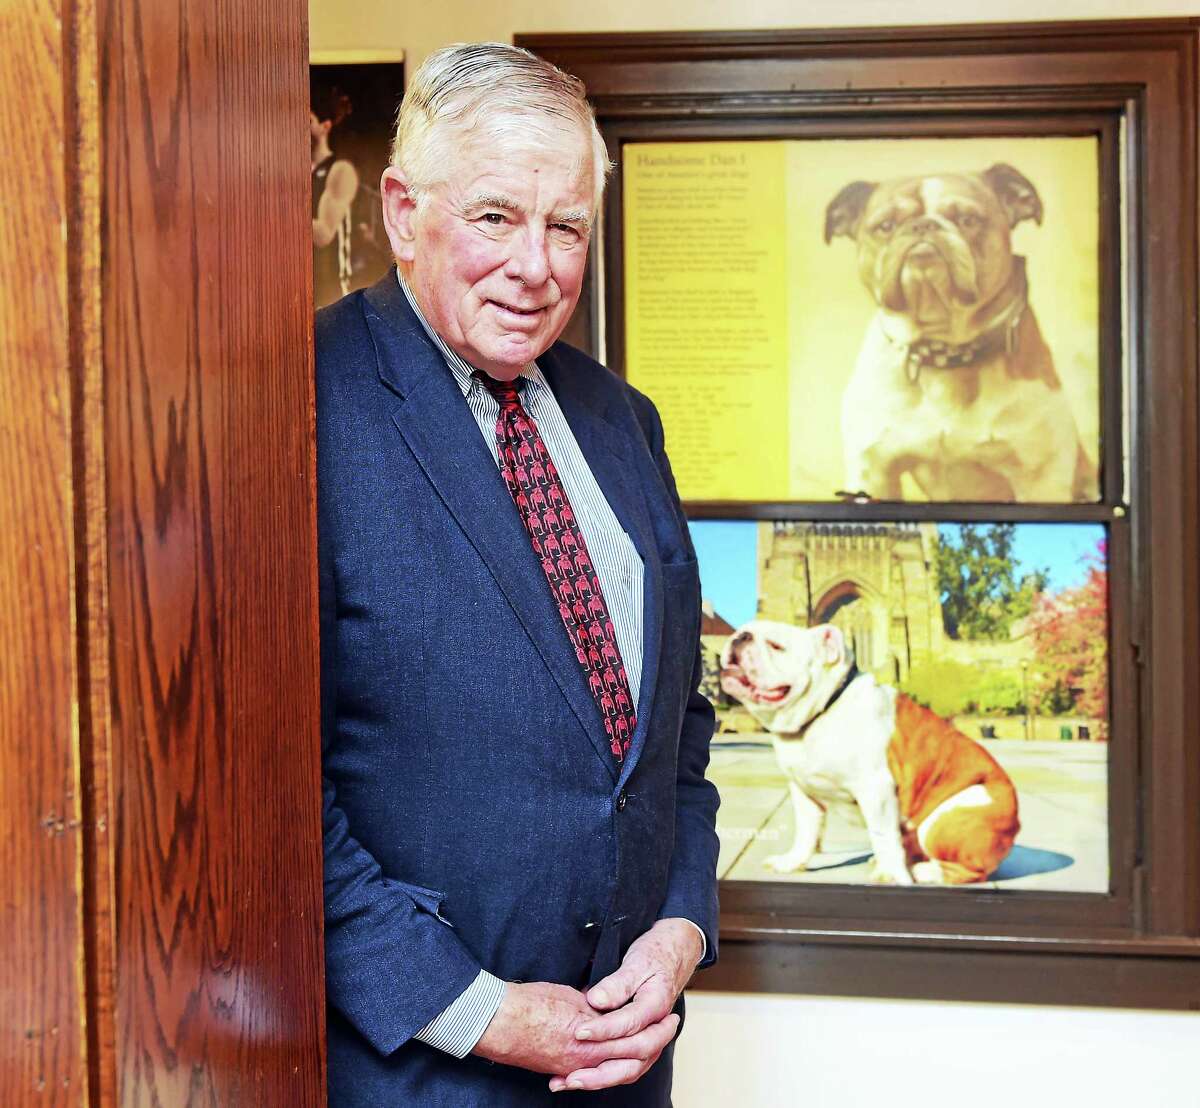 (Peter Hvizdak - New Haven Register)Chris Getman of Hamden, 75, Yale Class of 1964, the keeper of the Yale Bulldog Mascot Handsome Dan since 1983, at Mory's in New Haven, Monday, September 26, 2016.